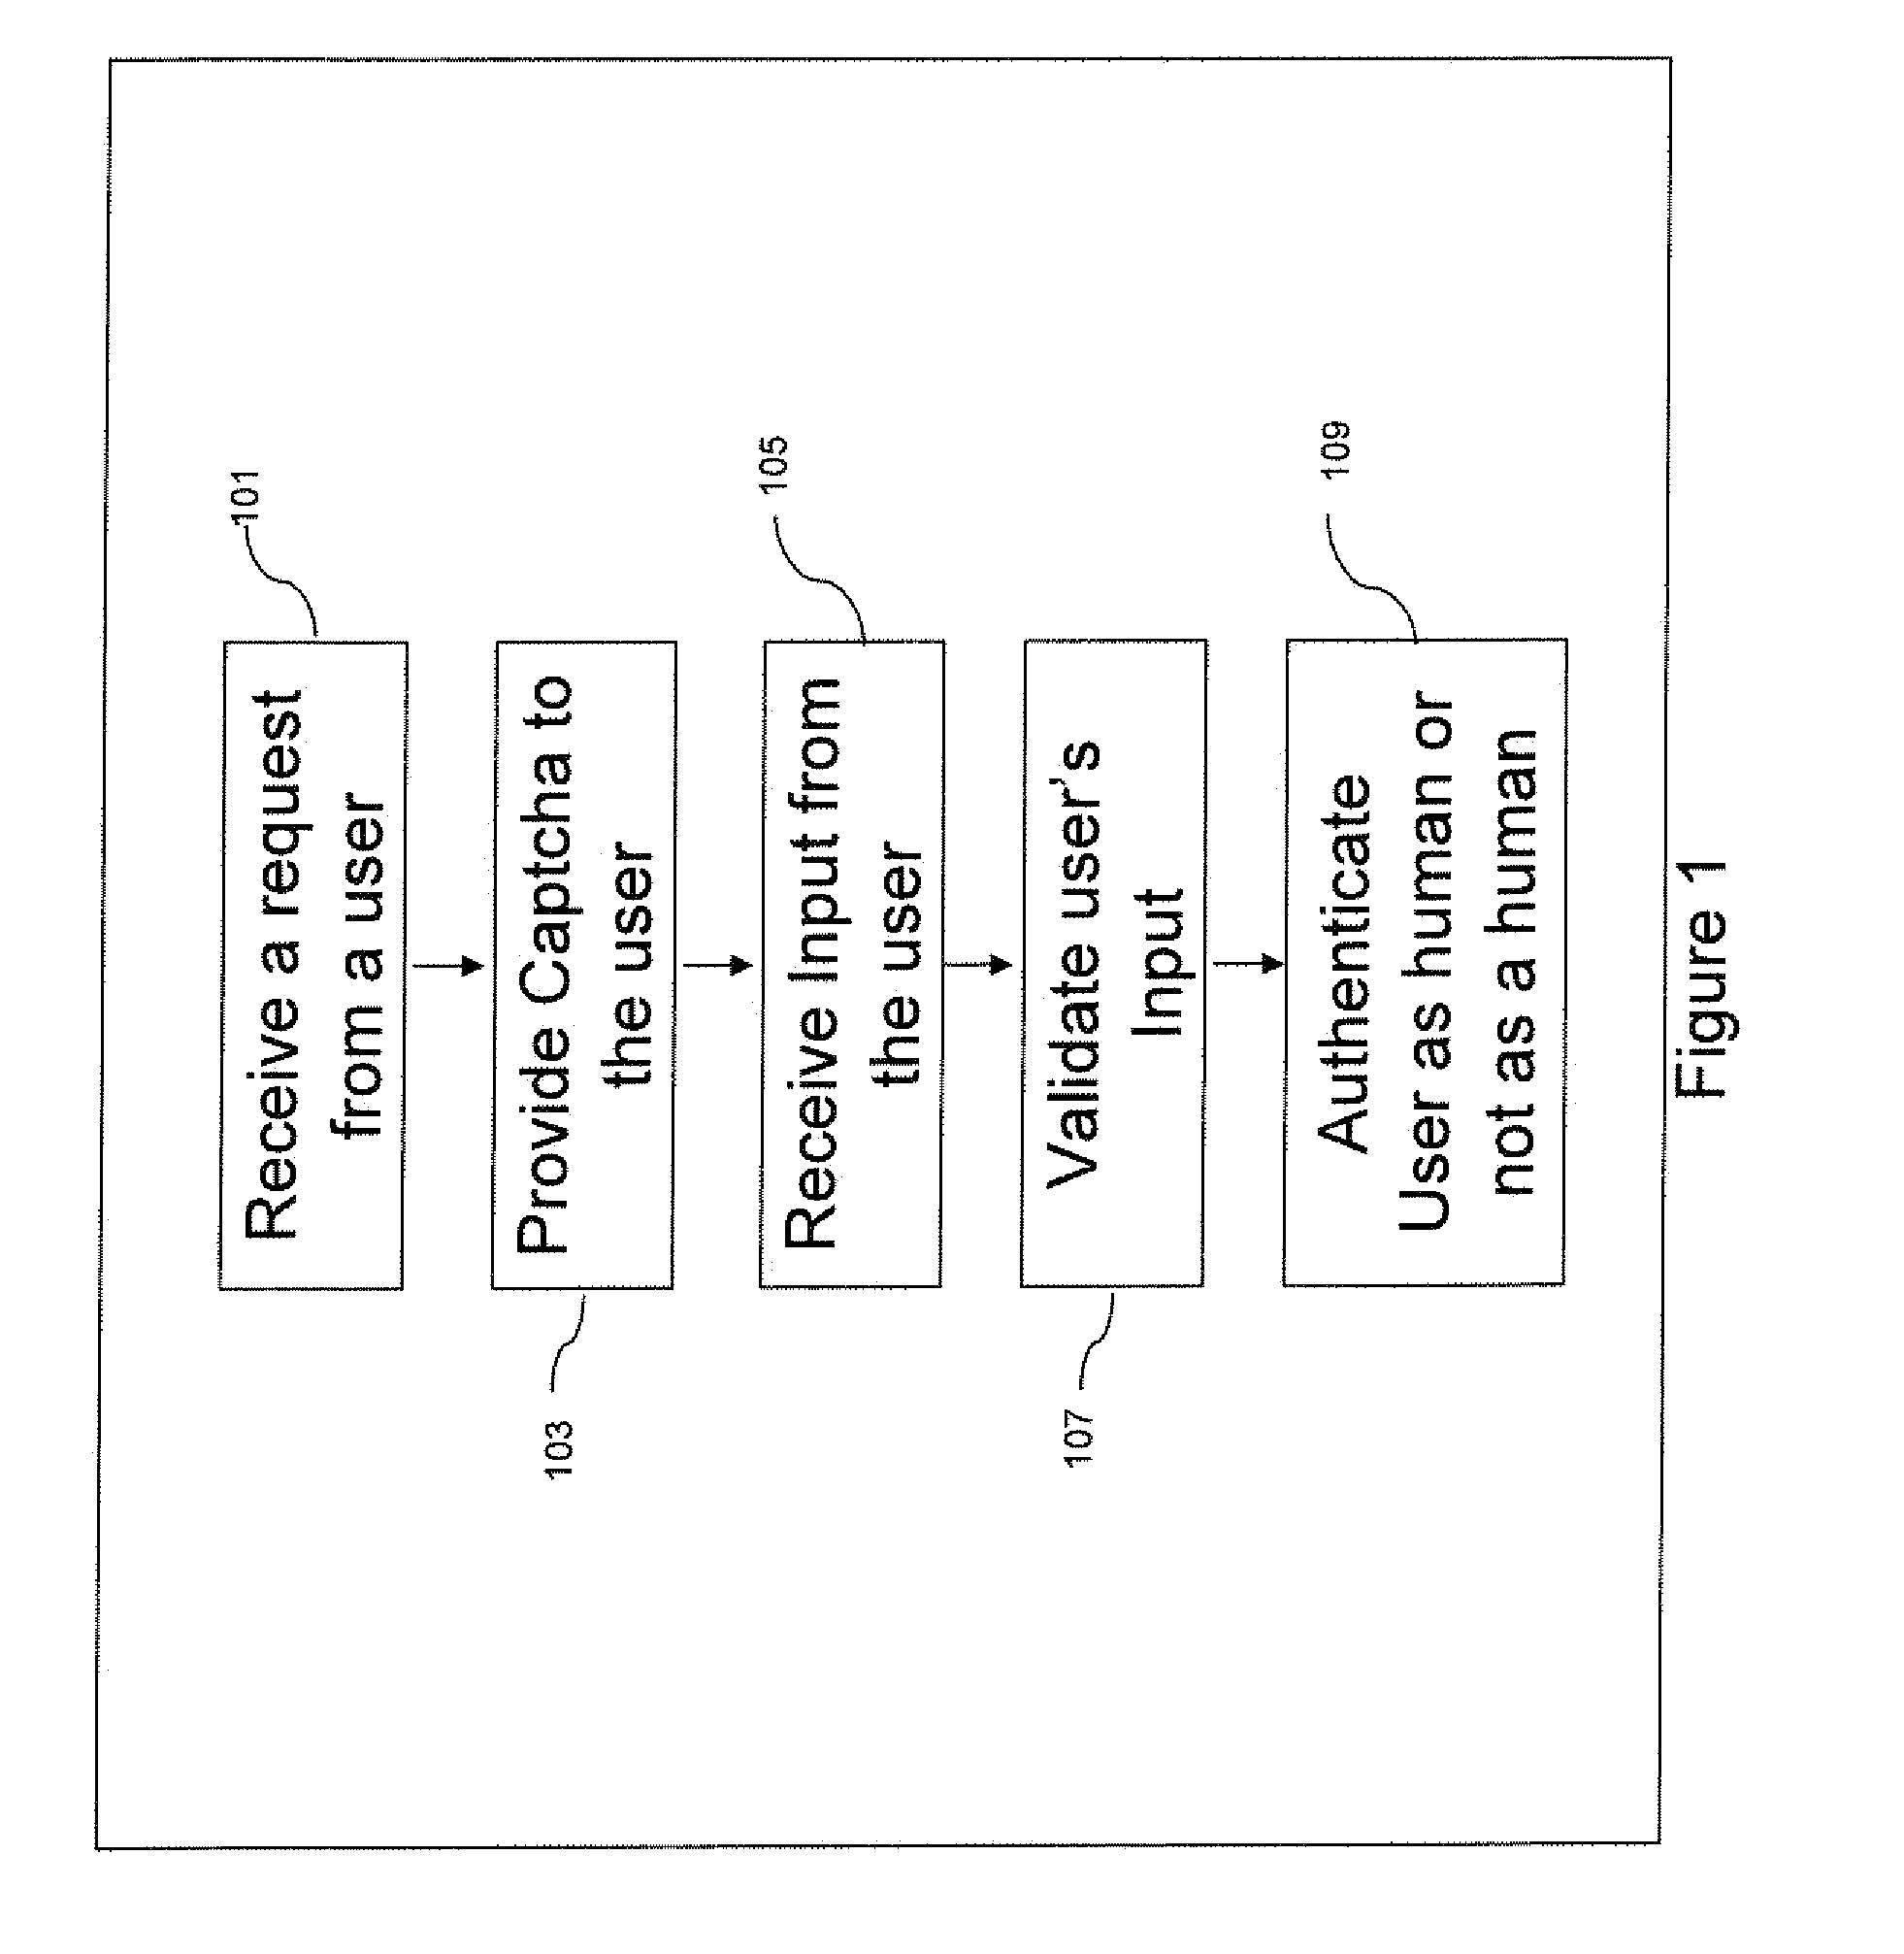 System and method for monitoring human interaction